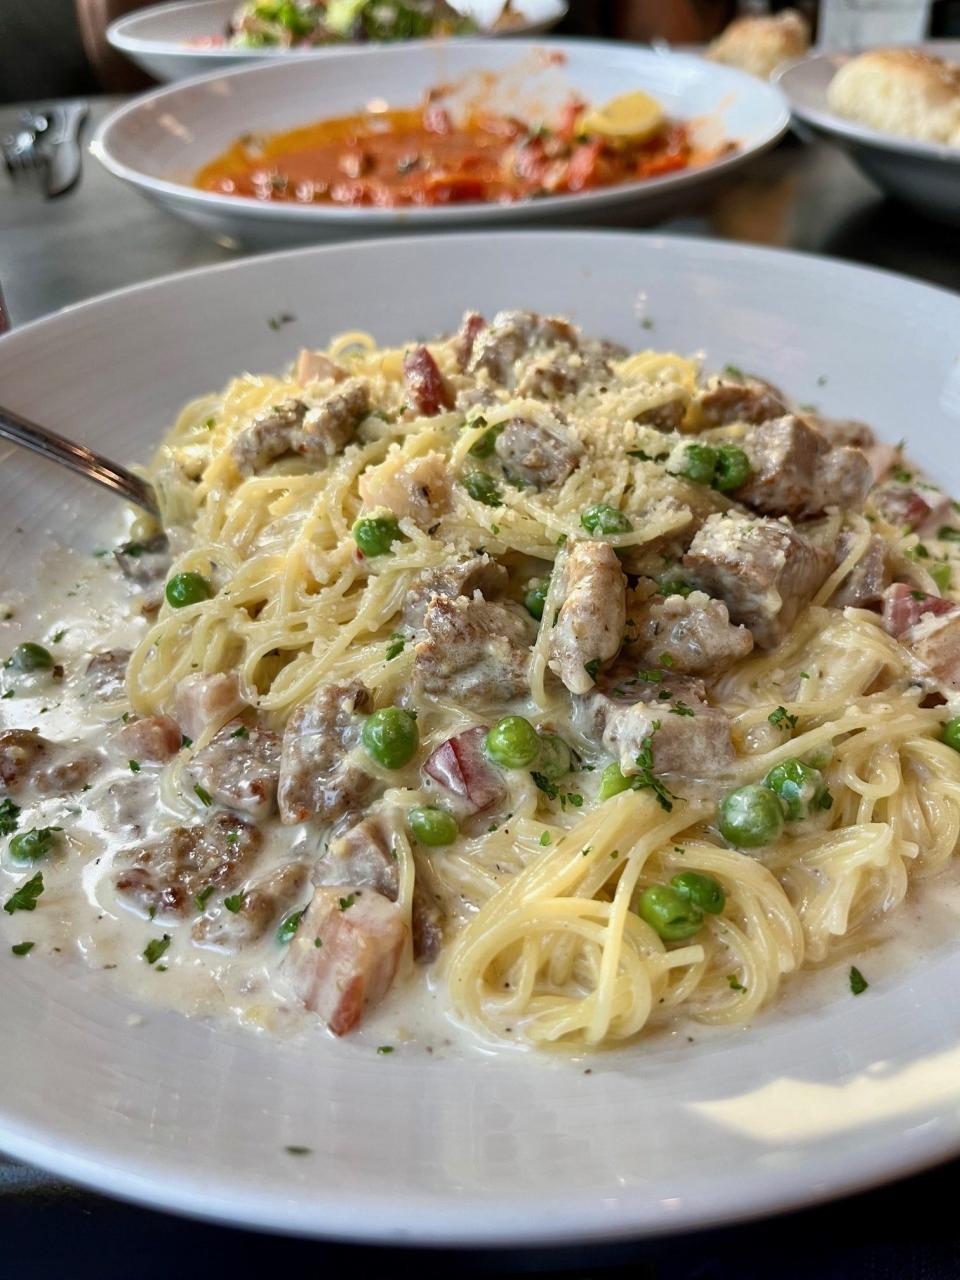 Mama's pasta at Two Meatballs in the Kitchen features diced sausage and meatballs sautéed with pancetta, ricotta and peas served in a cream sauce over pasta.